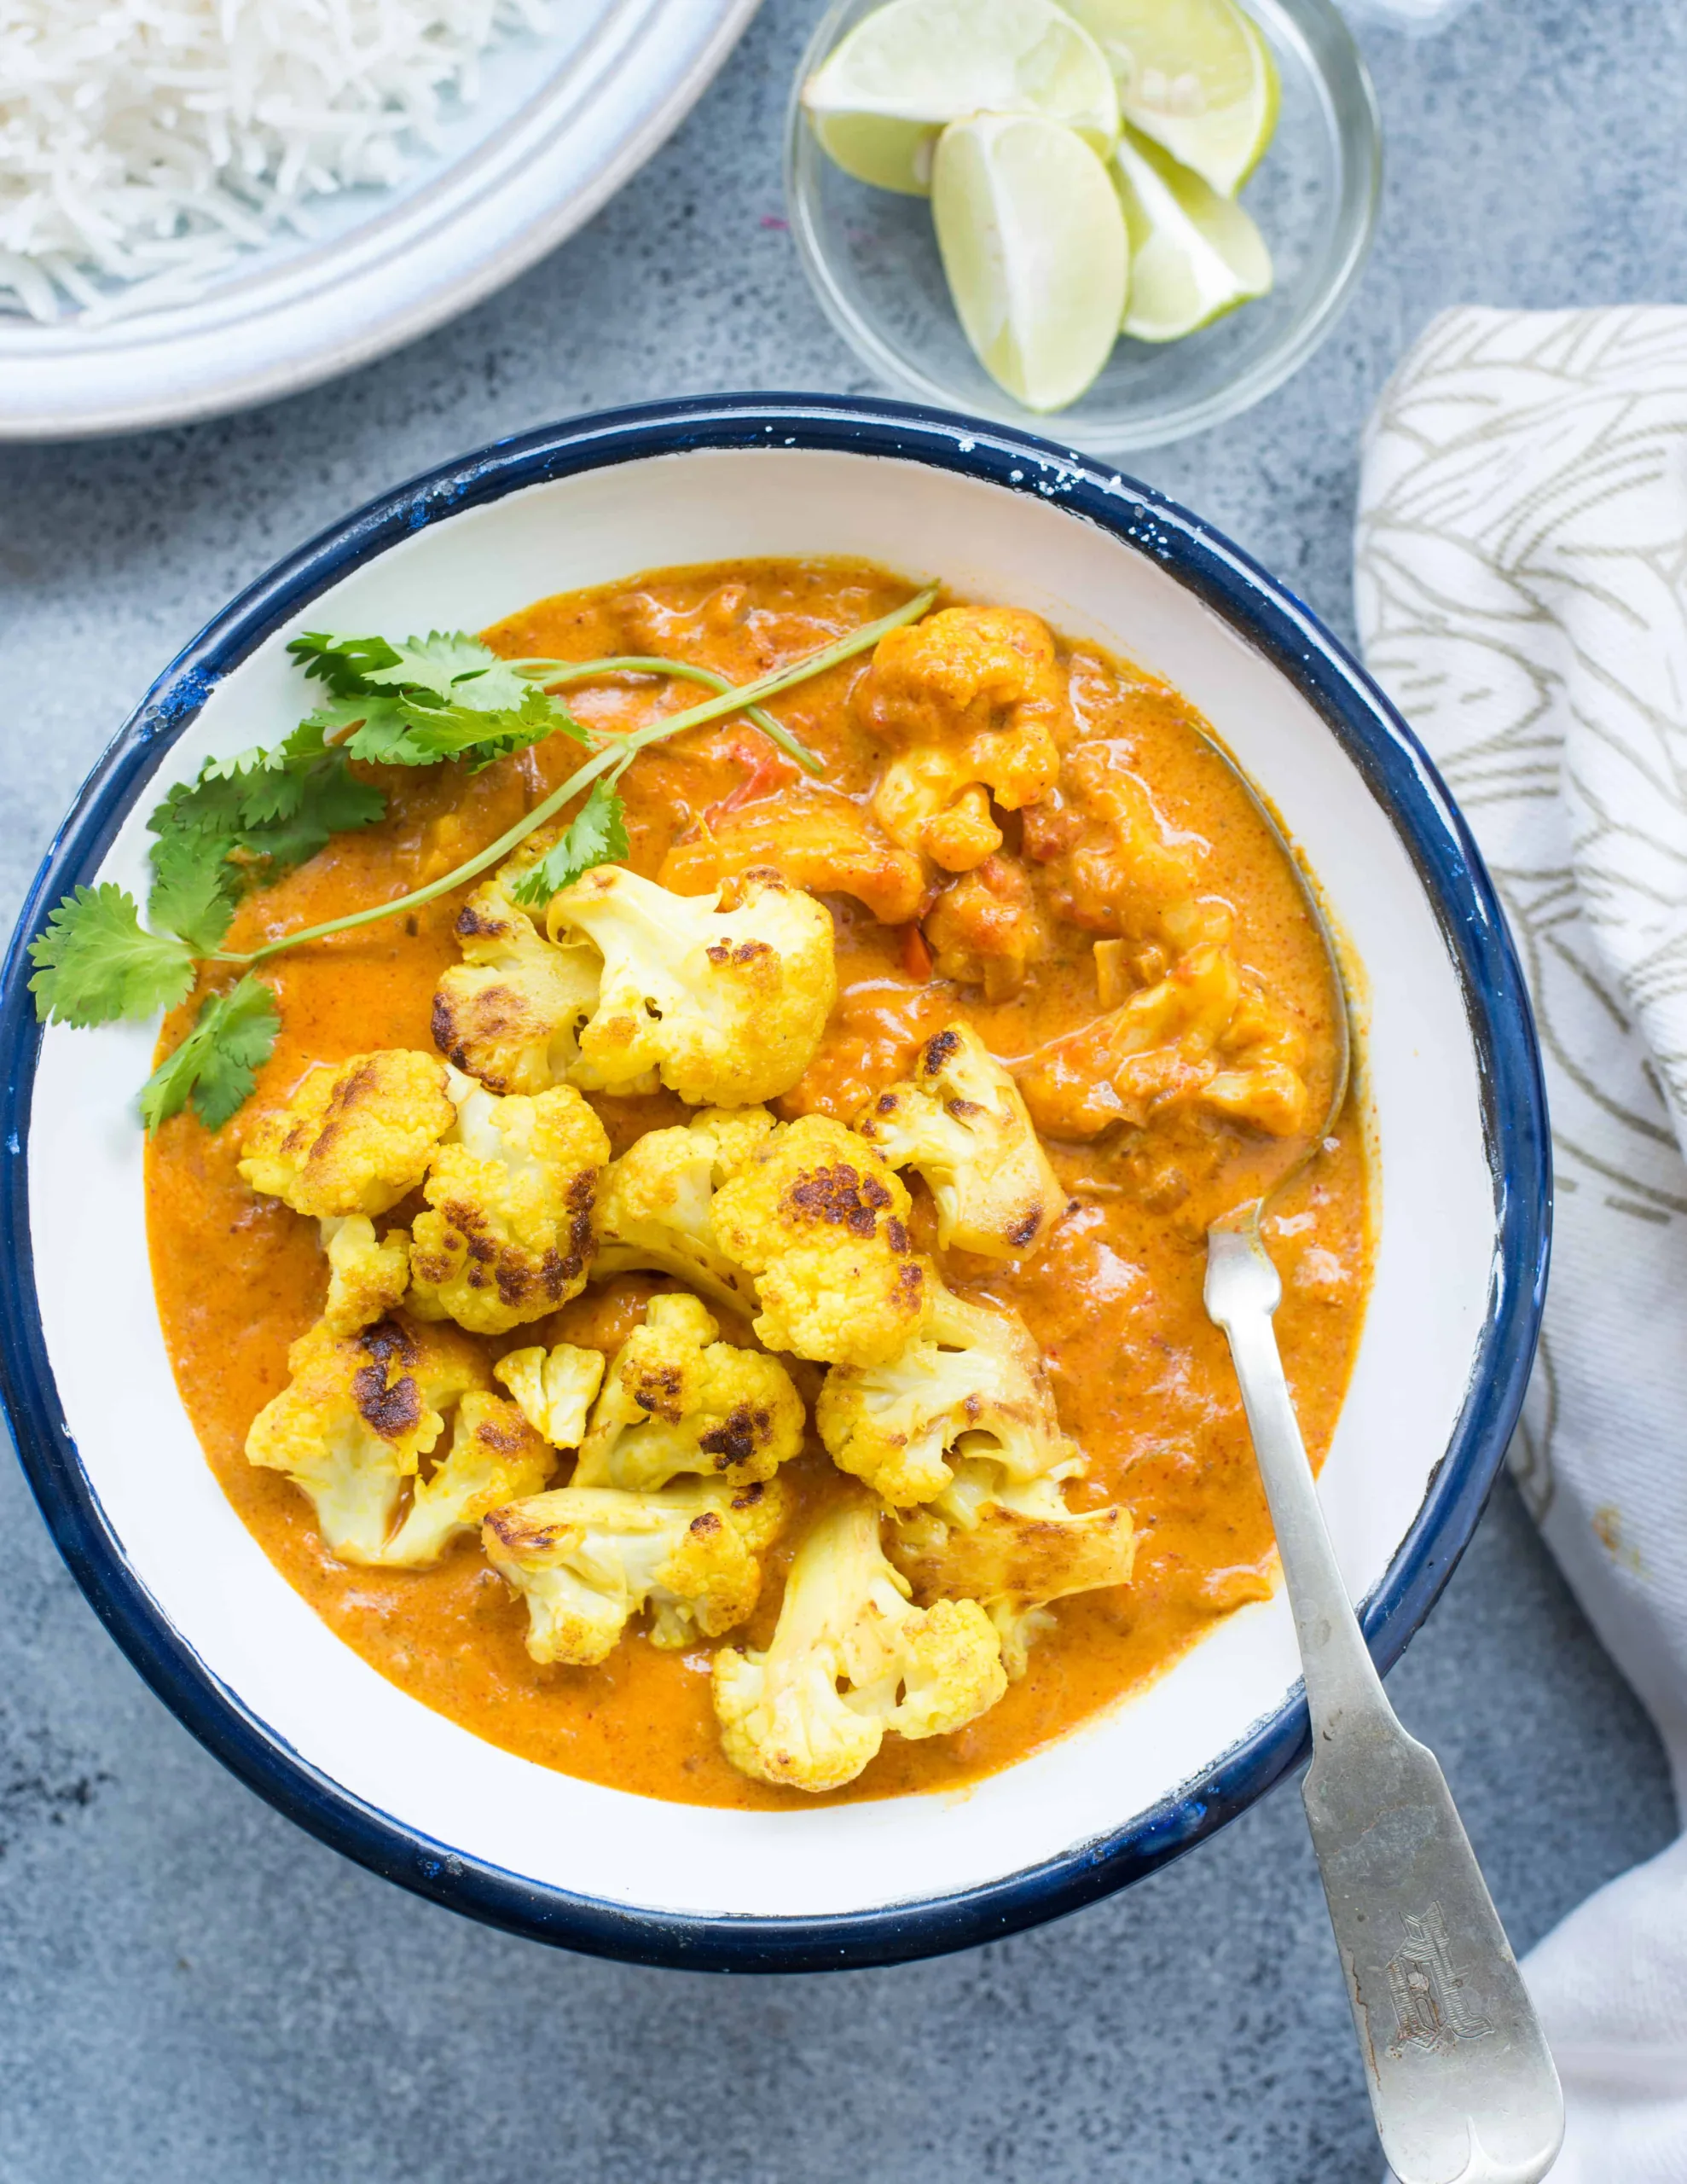 Delicious Coconut Cauliflower Curry Recipe: A Flavorful and Nutritious Vegan Dish